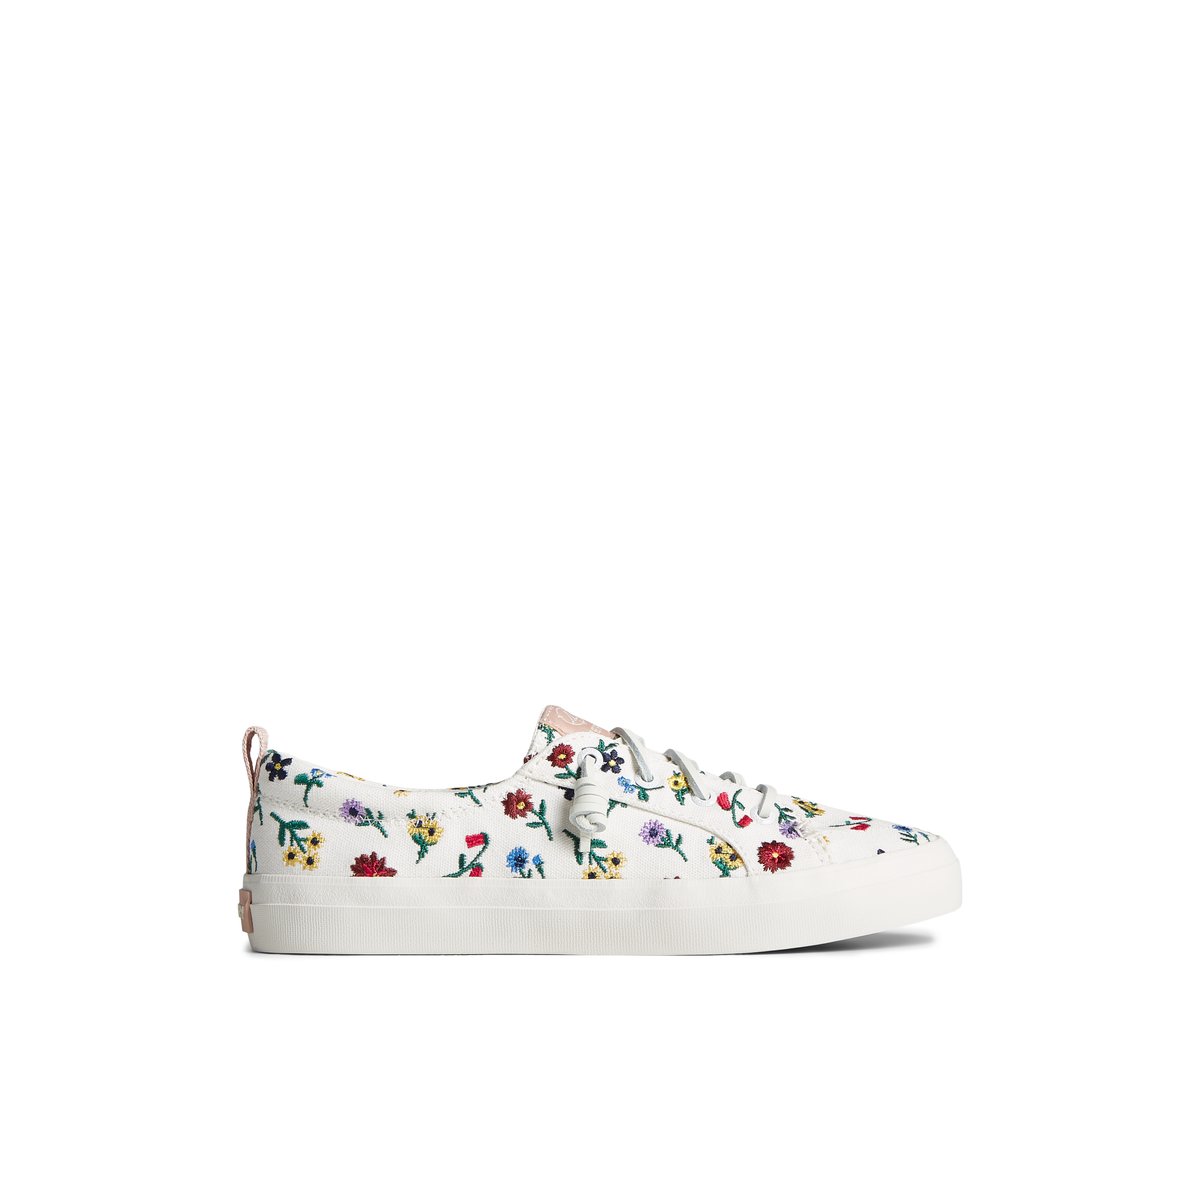 Crest Vibe Floral Sneaker Brown Primary - Multi Women's Sneakers 